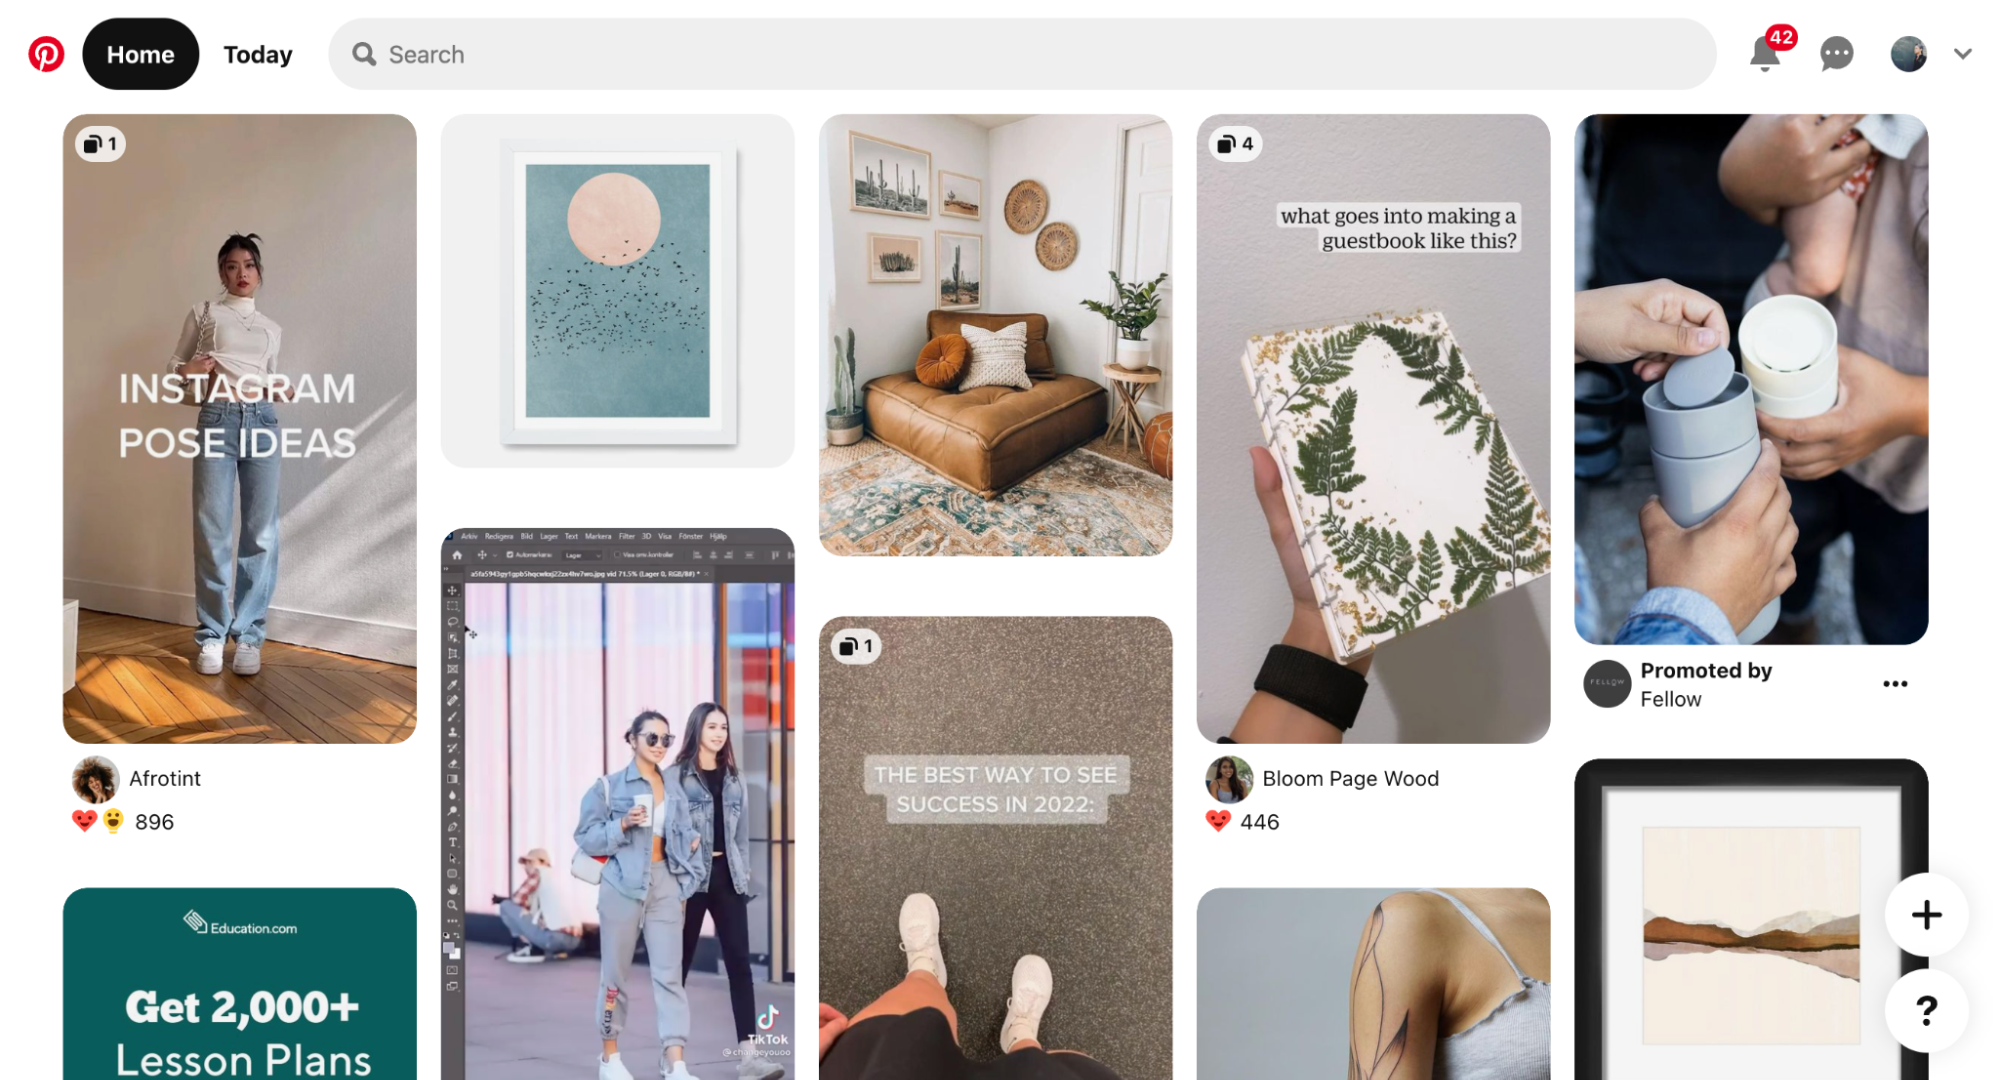 Your Pinterest feed